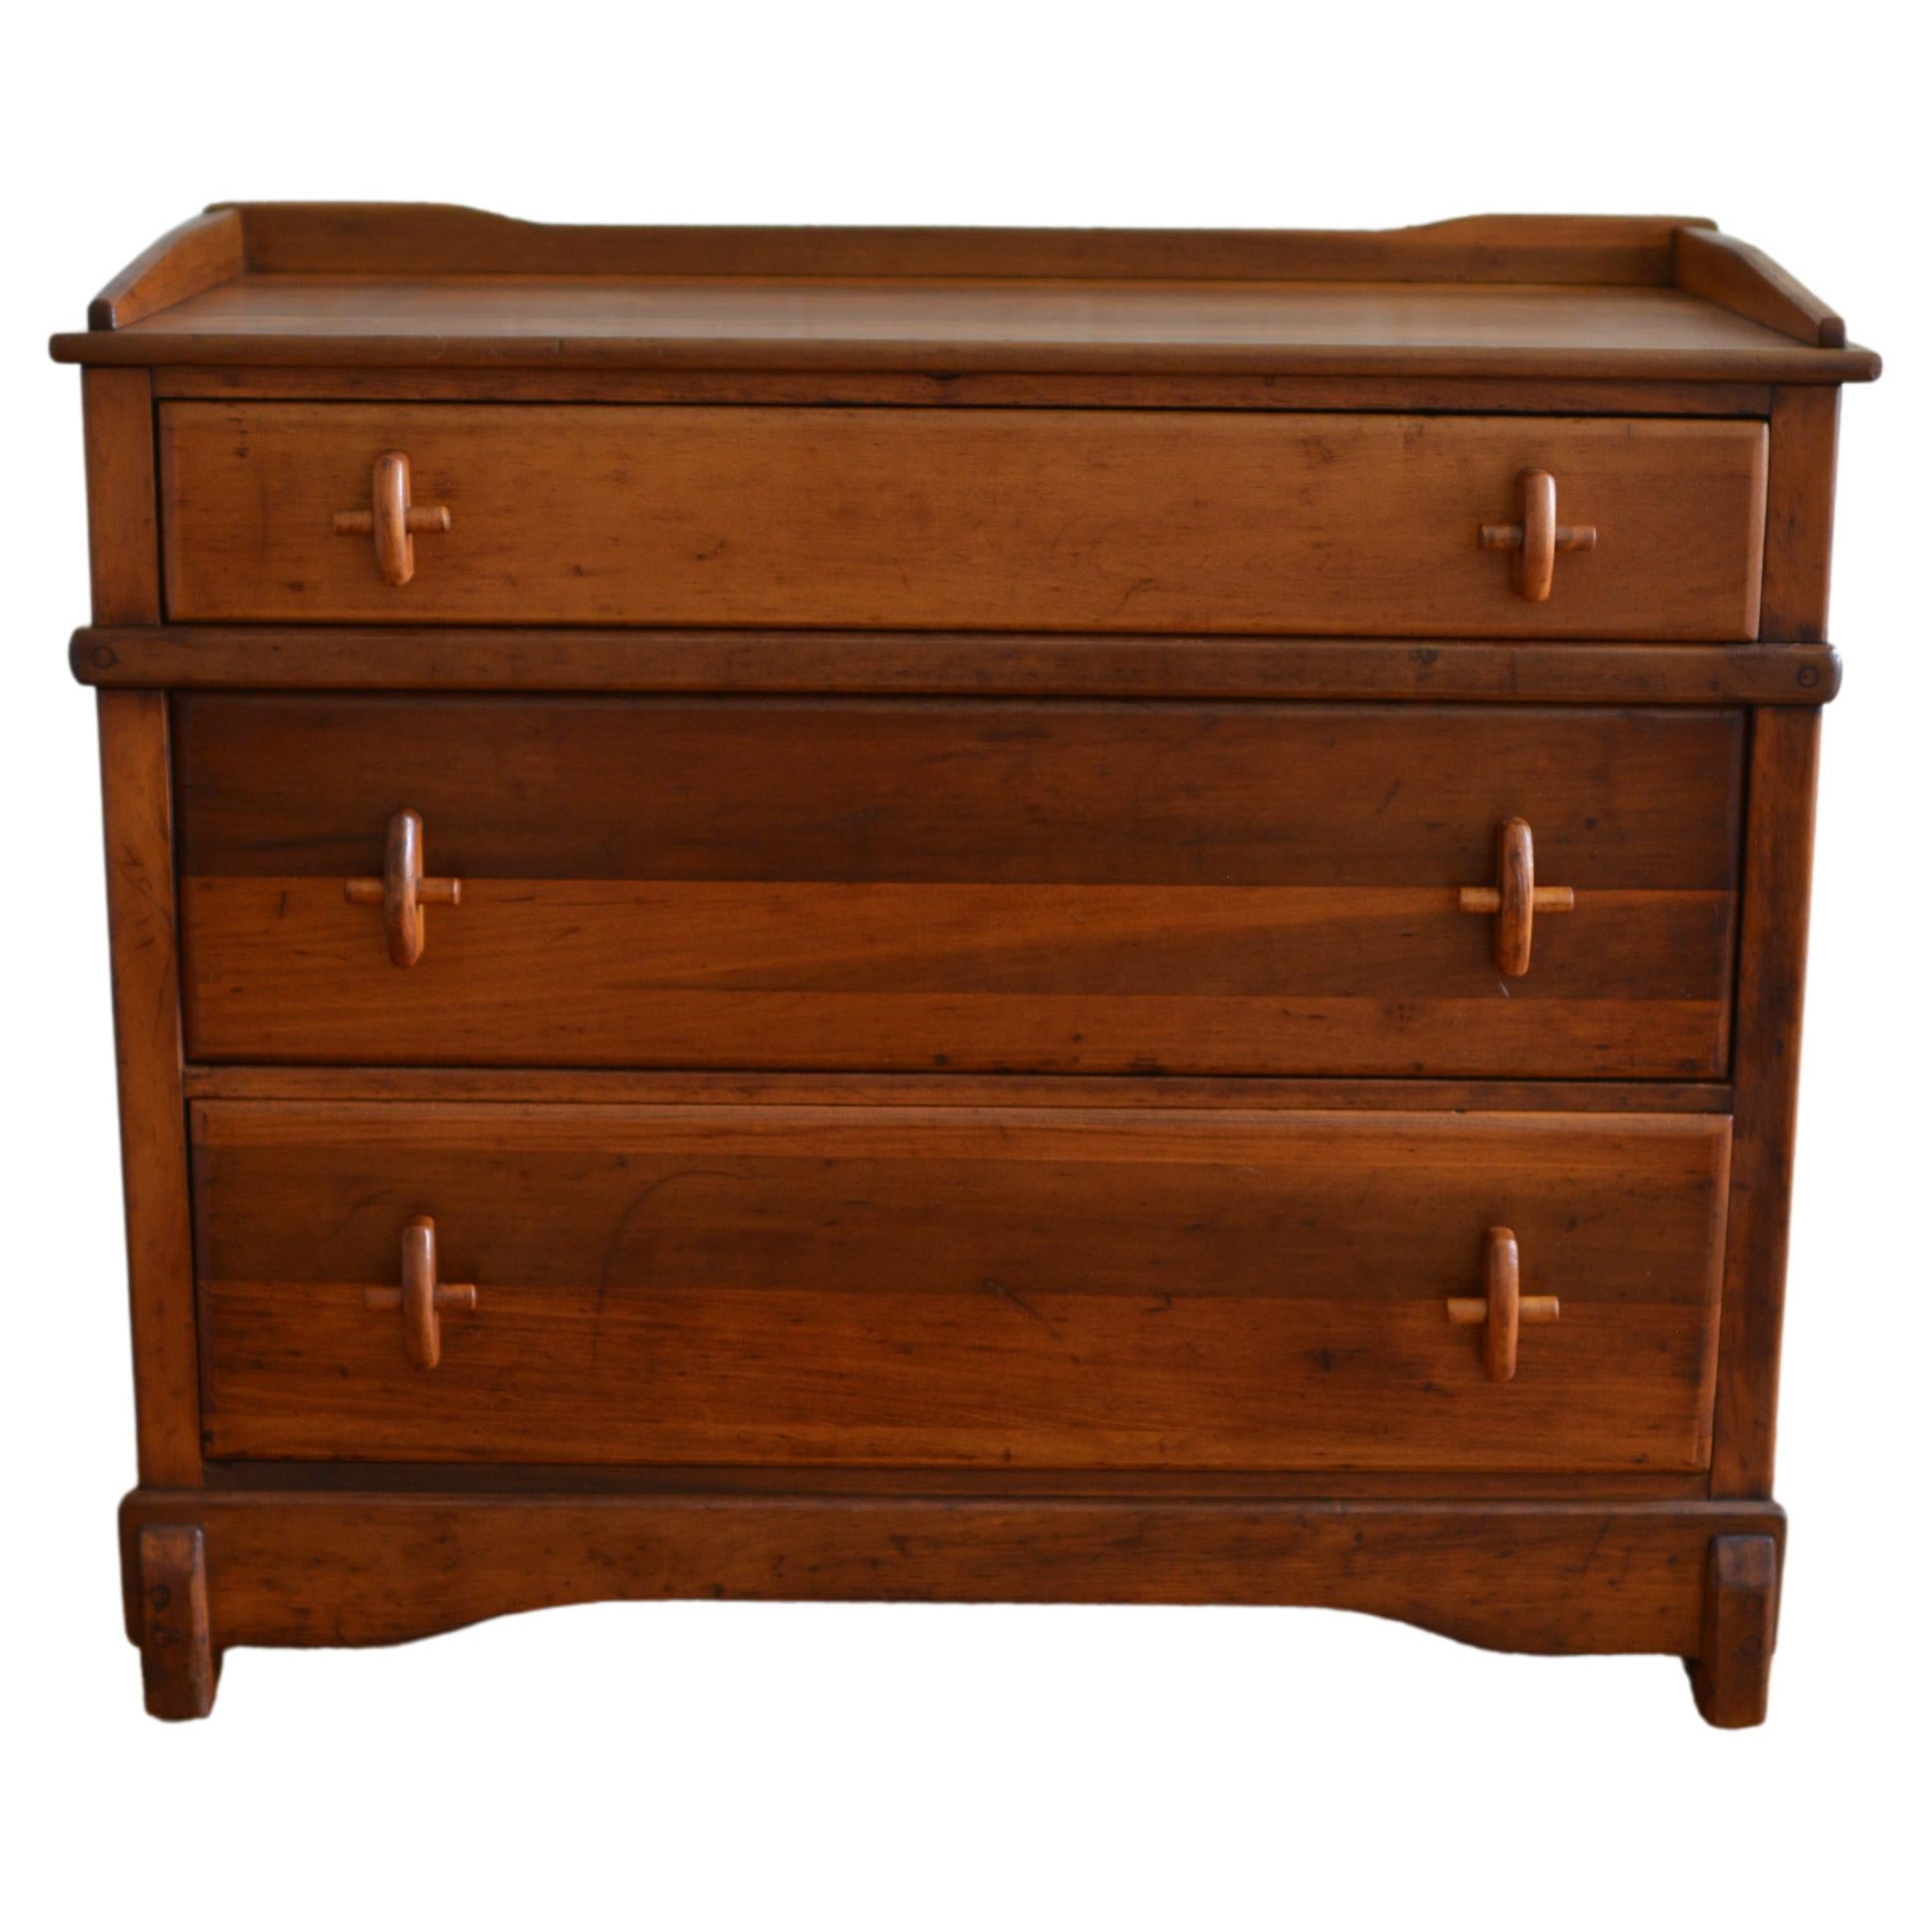 Antique Chest of Drawers with Cross Handle Pulls